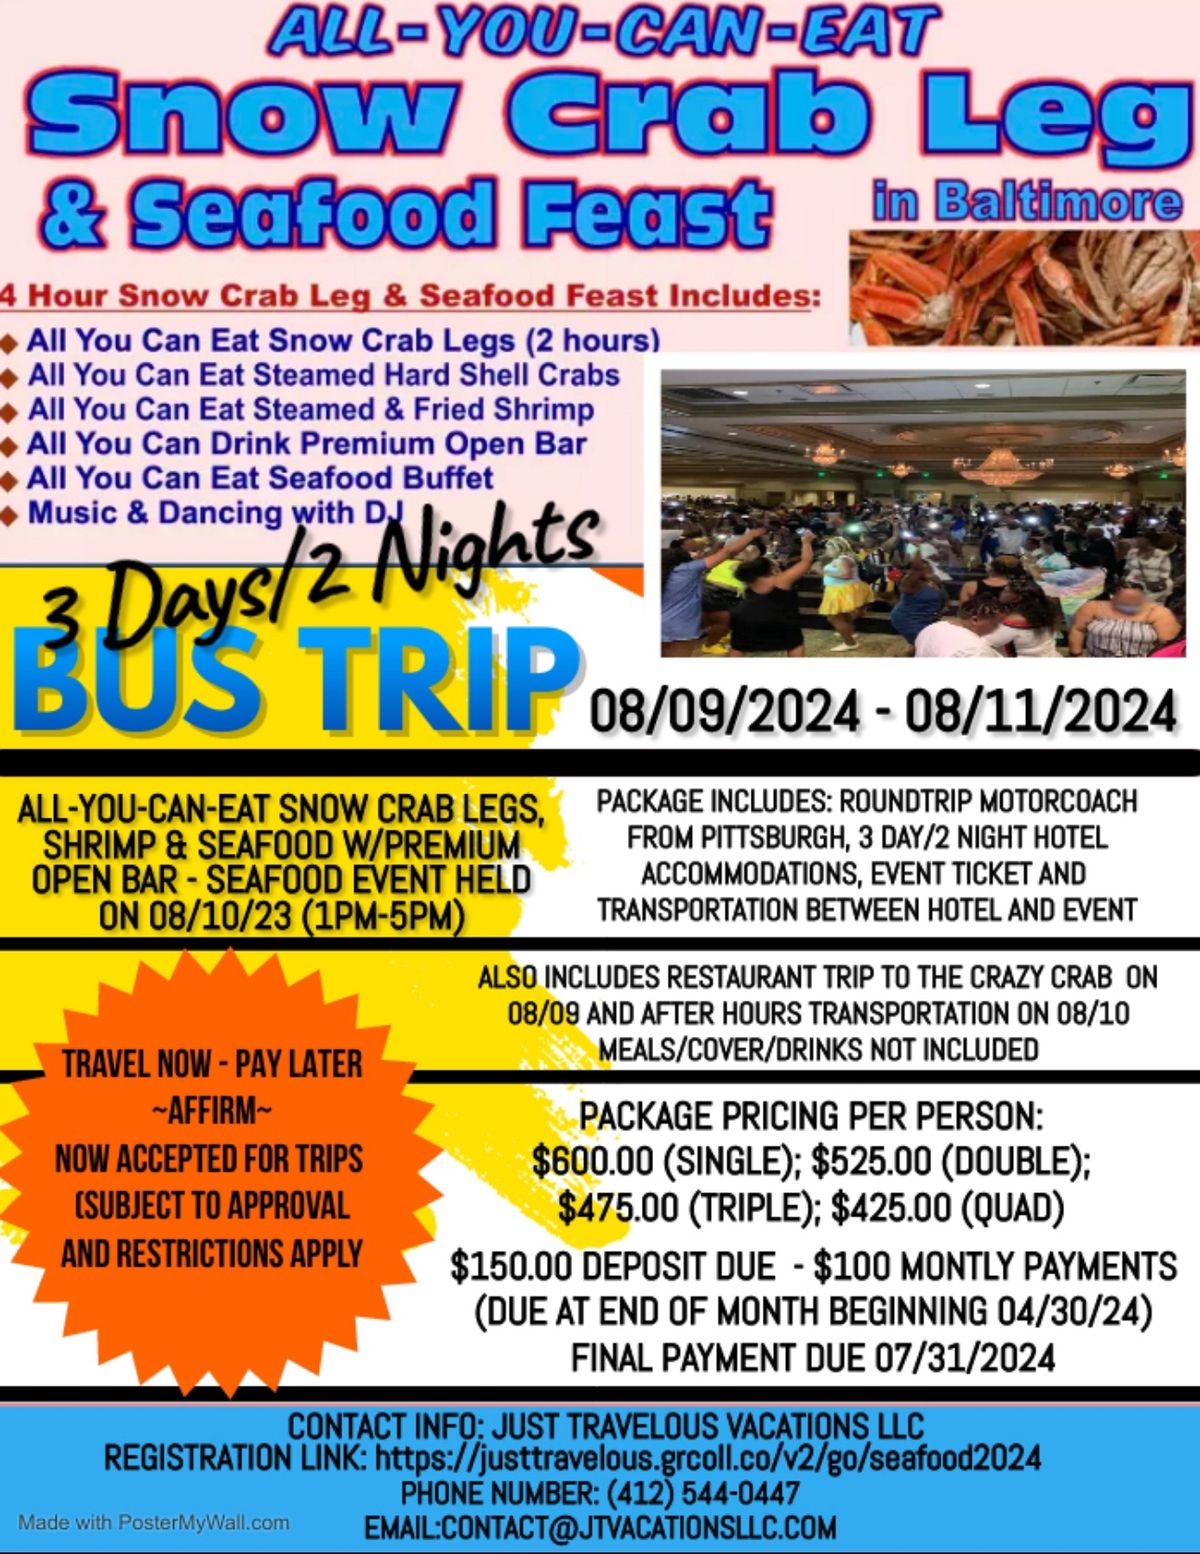 All-You-Can-Eat Snow Crab, Shrimp & Seafood Feast (Premium Open Bar) - Baltimore Bus Trip 2024